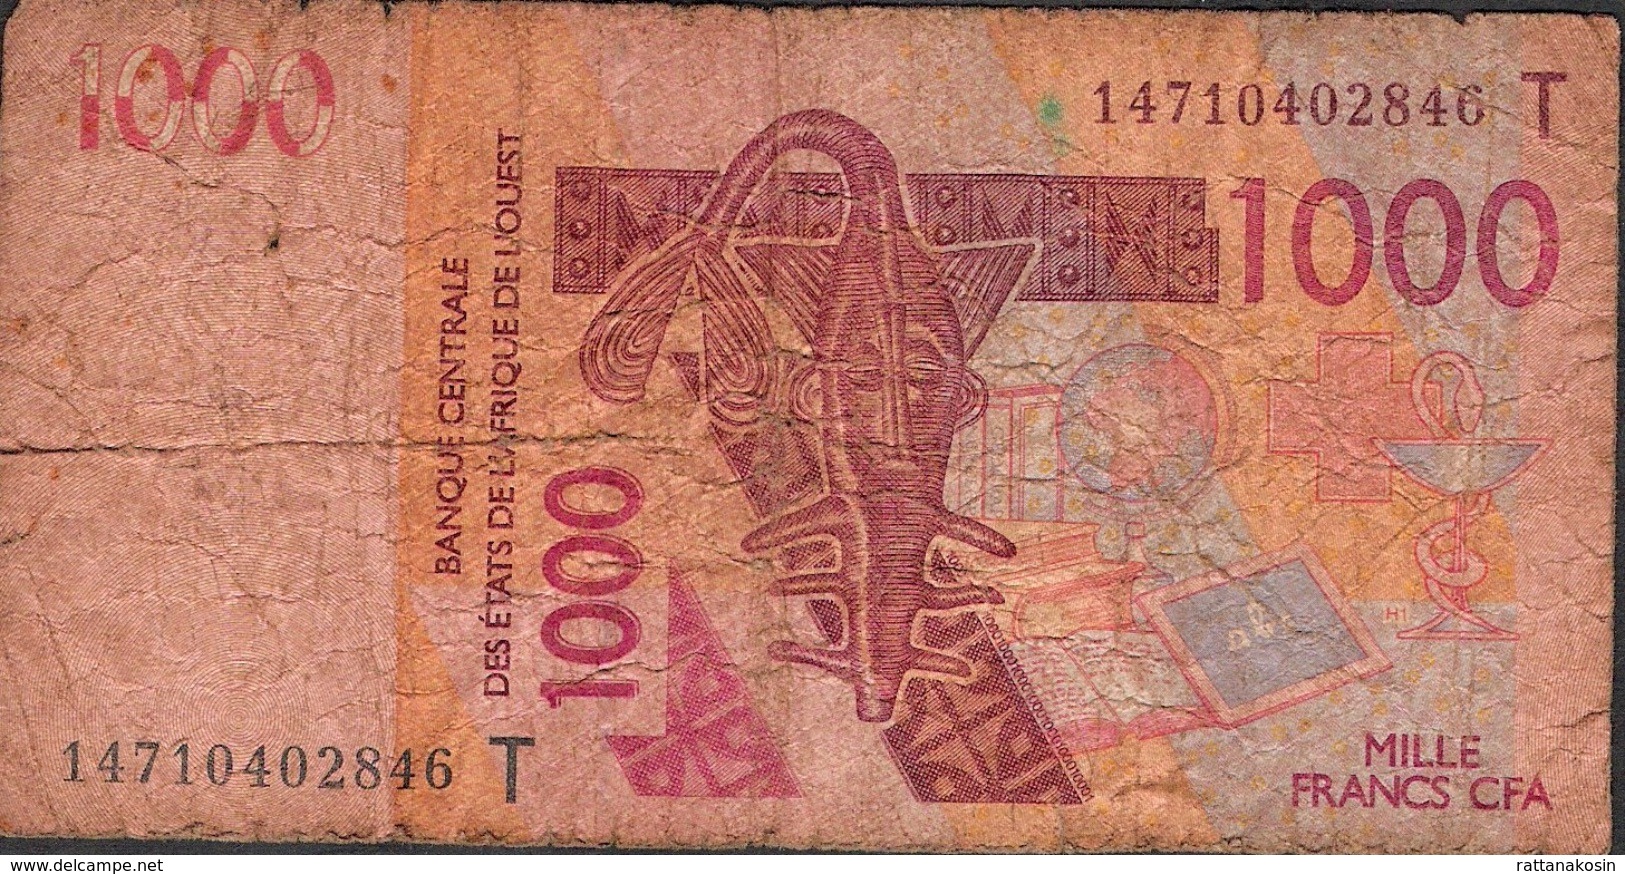 W.A.S. WEST AFRICAN STATES TOGO P815Tn 1000 FRANCS (20)14 FINE - Togo